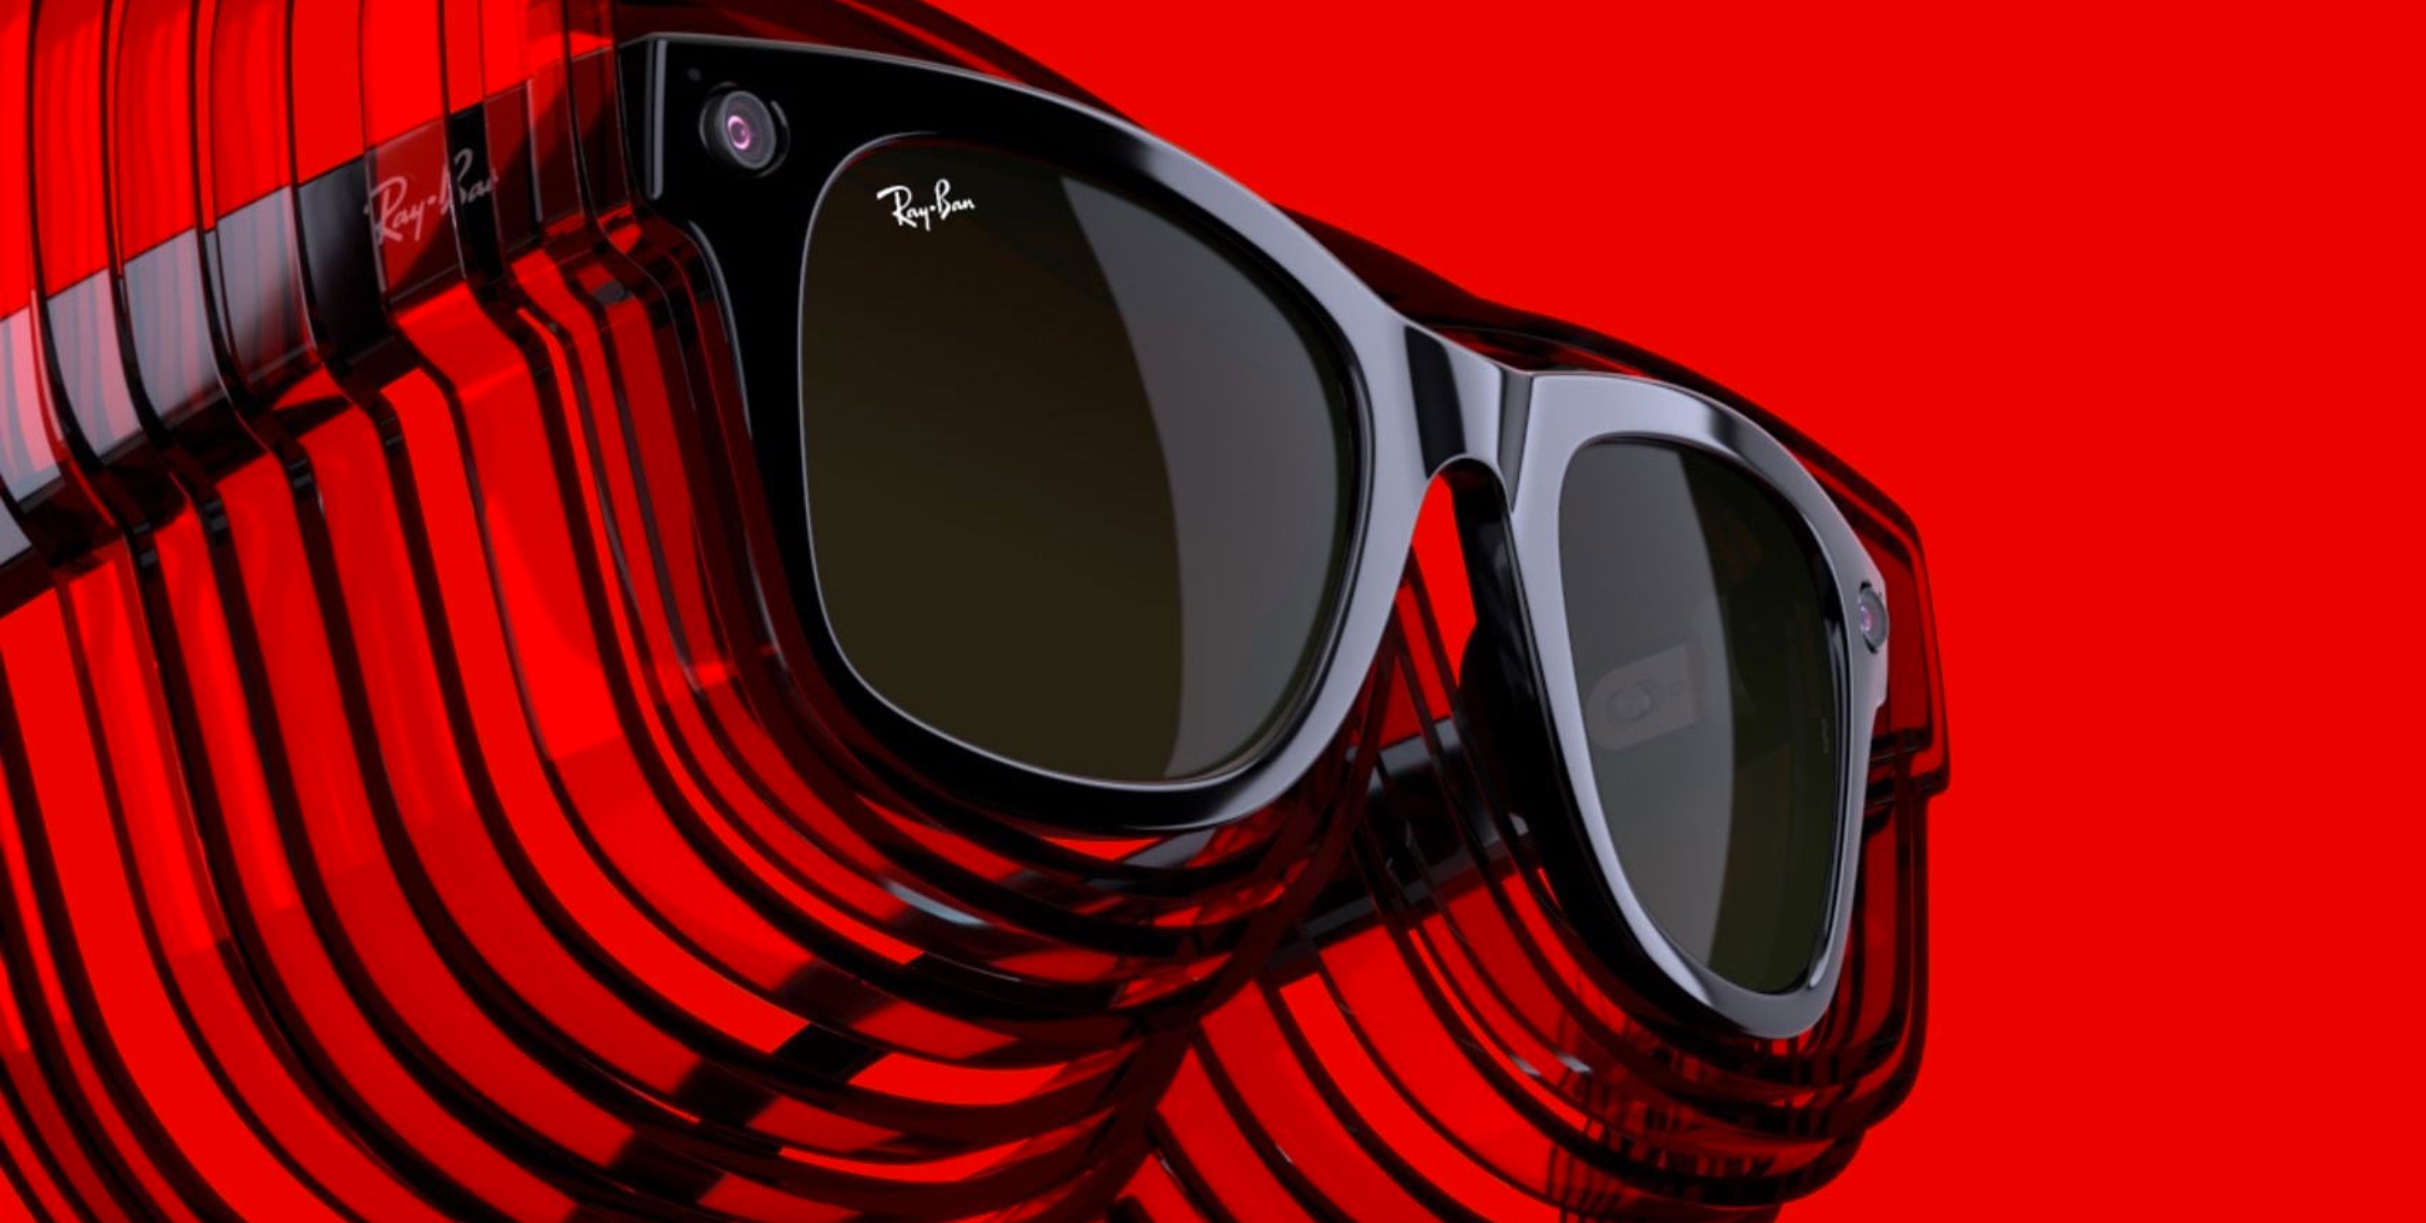 Ray-Ban x Facebook new smart sunglasses are here! - 9to5Toys